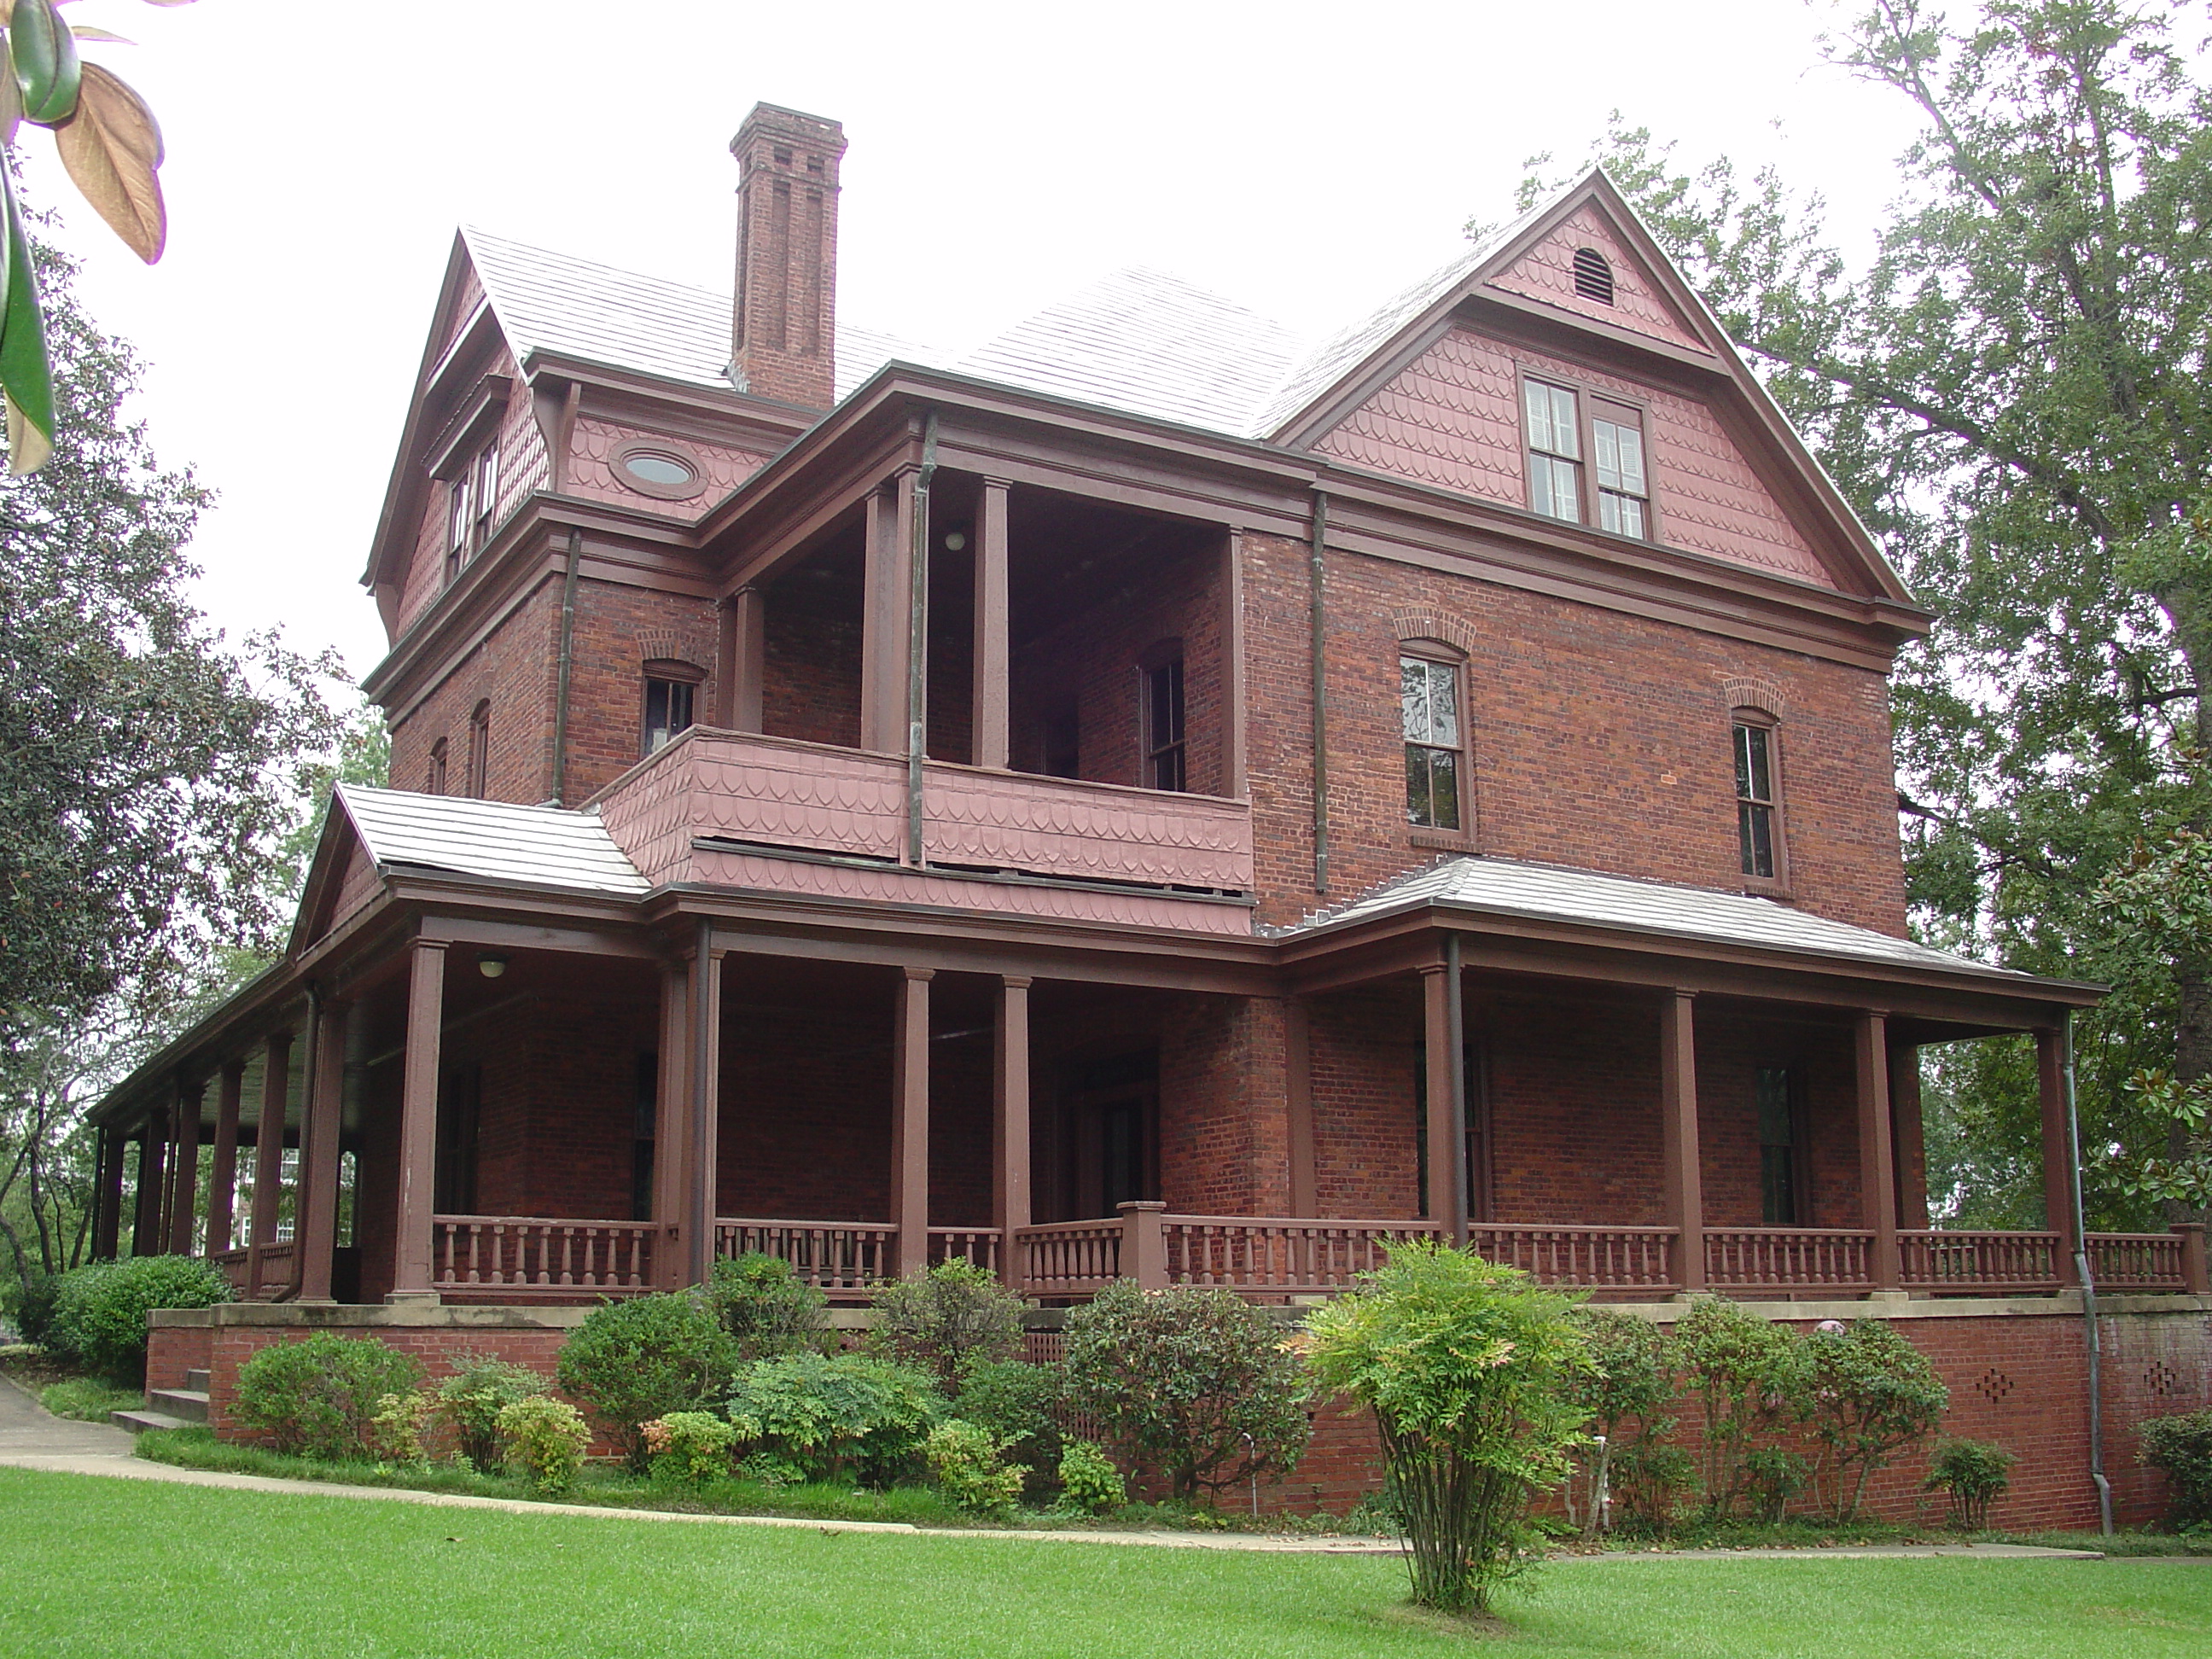 A three story Queen Anne Revival style red brick house